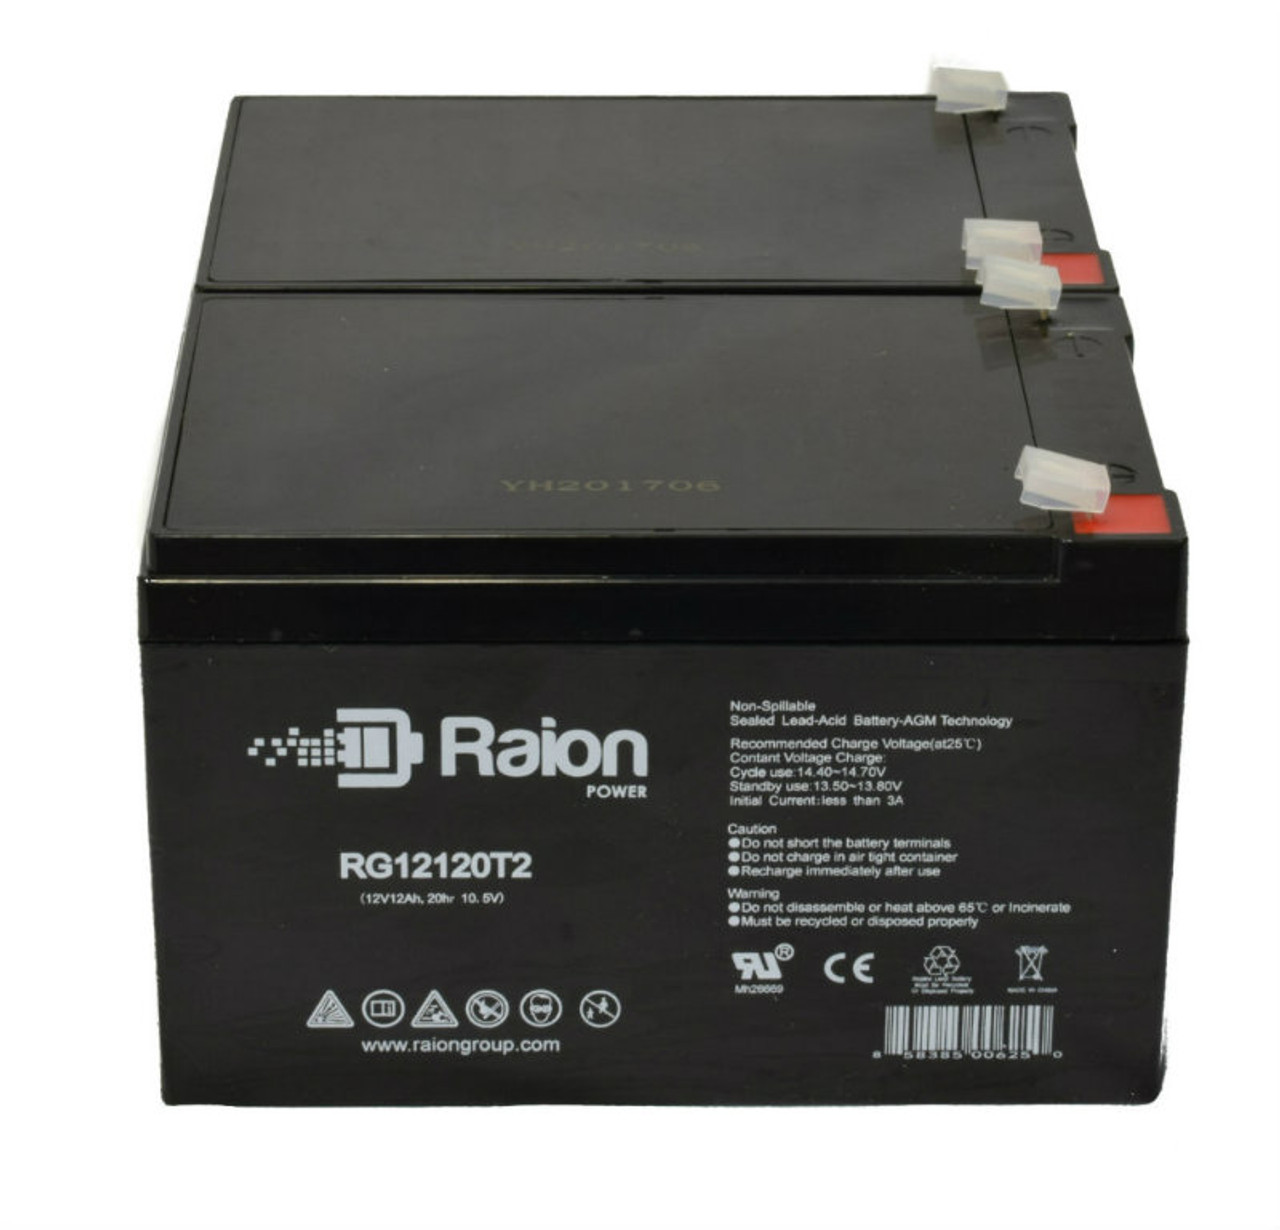 Raion Power RG12120T2 12V 12Ah Replacement UPS Battery for OPTI-UPS ES1000 1000ES - 2 Pack